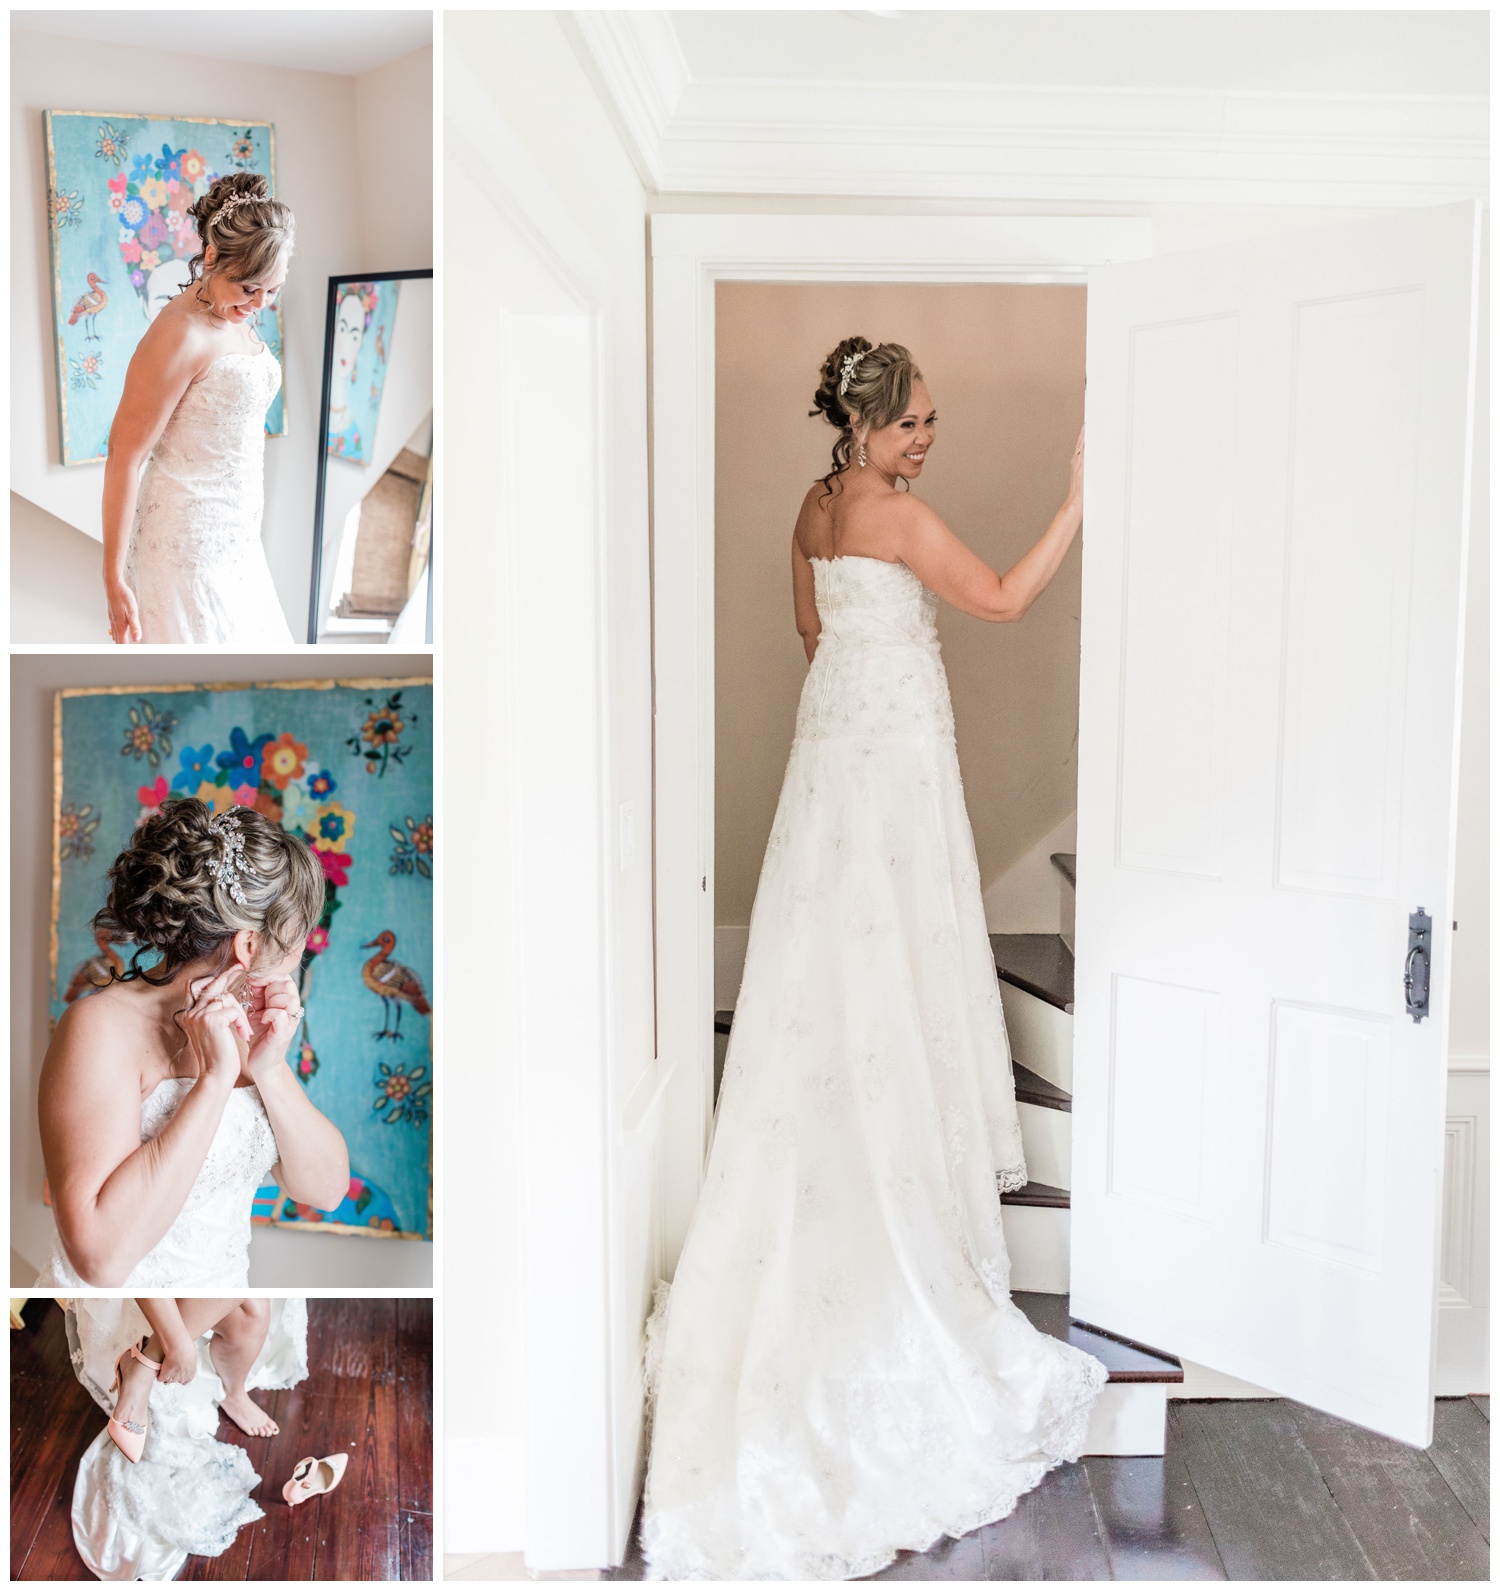 Getting ready photos - Whitfield square elopement - savannah elopement package